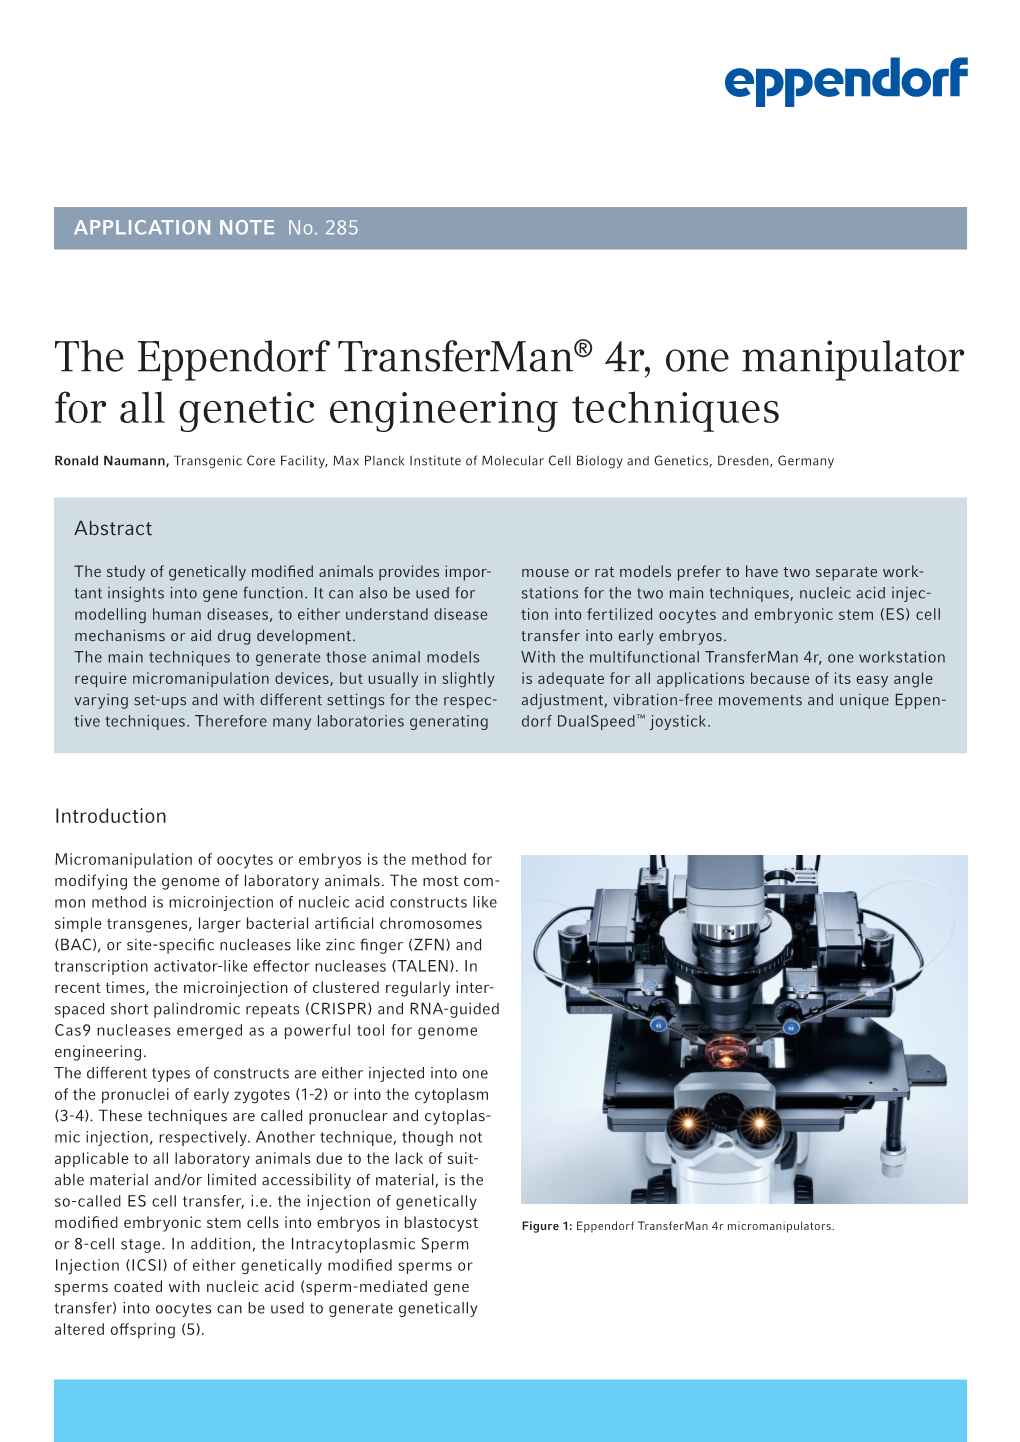 The Eppendorf Transferman® 4R, One Manipulator for All Genetic Engineering Techniques